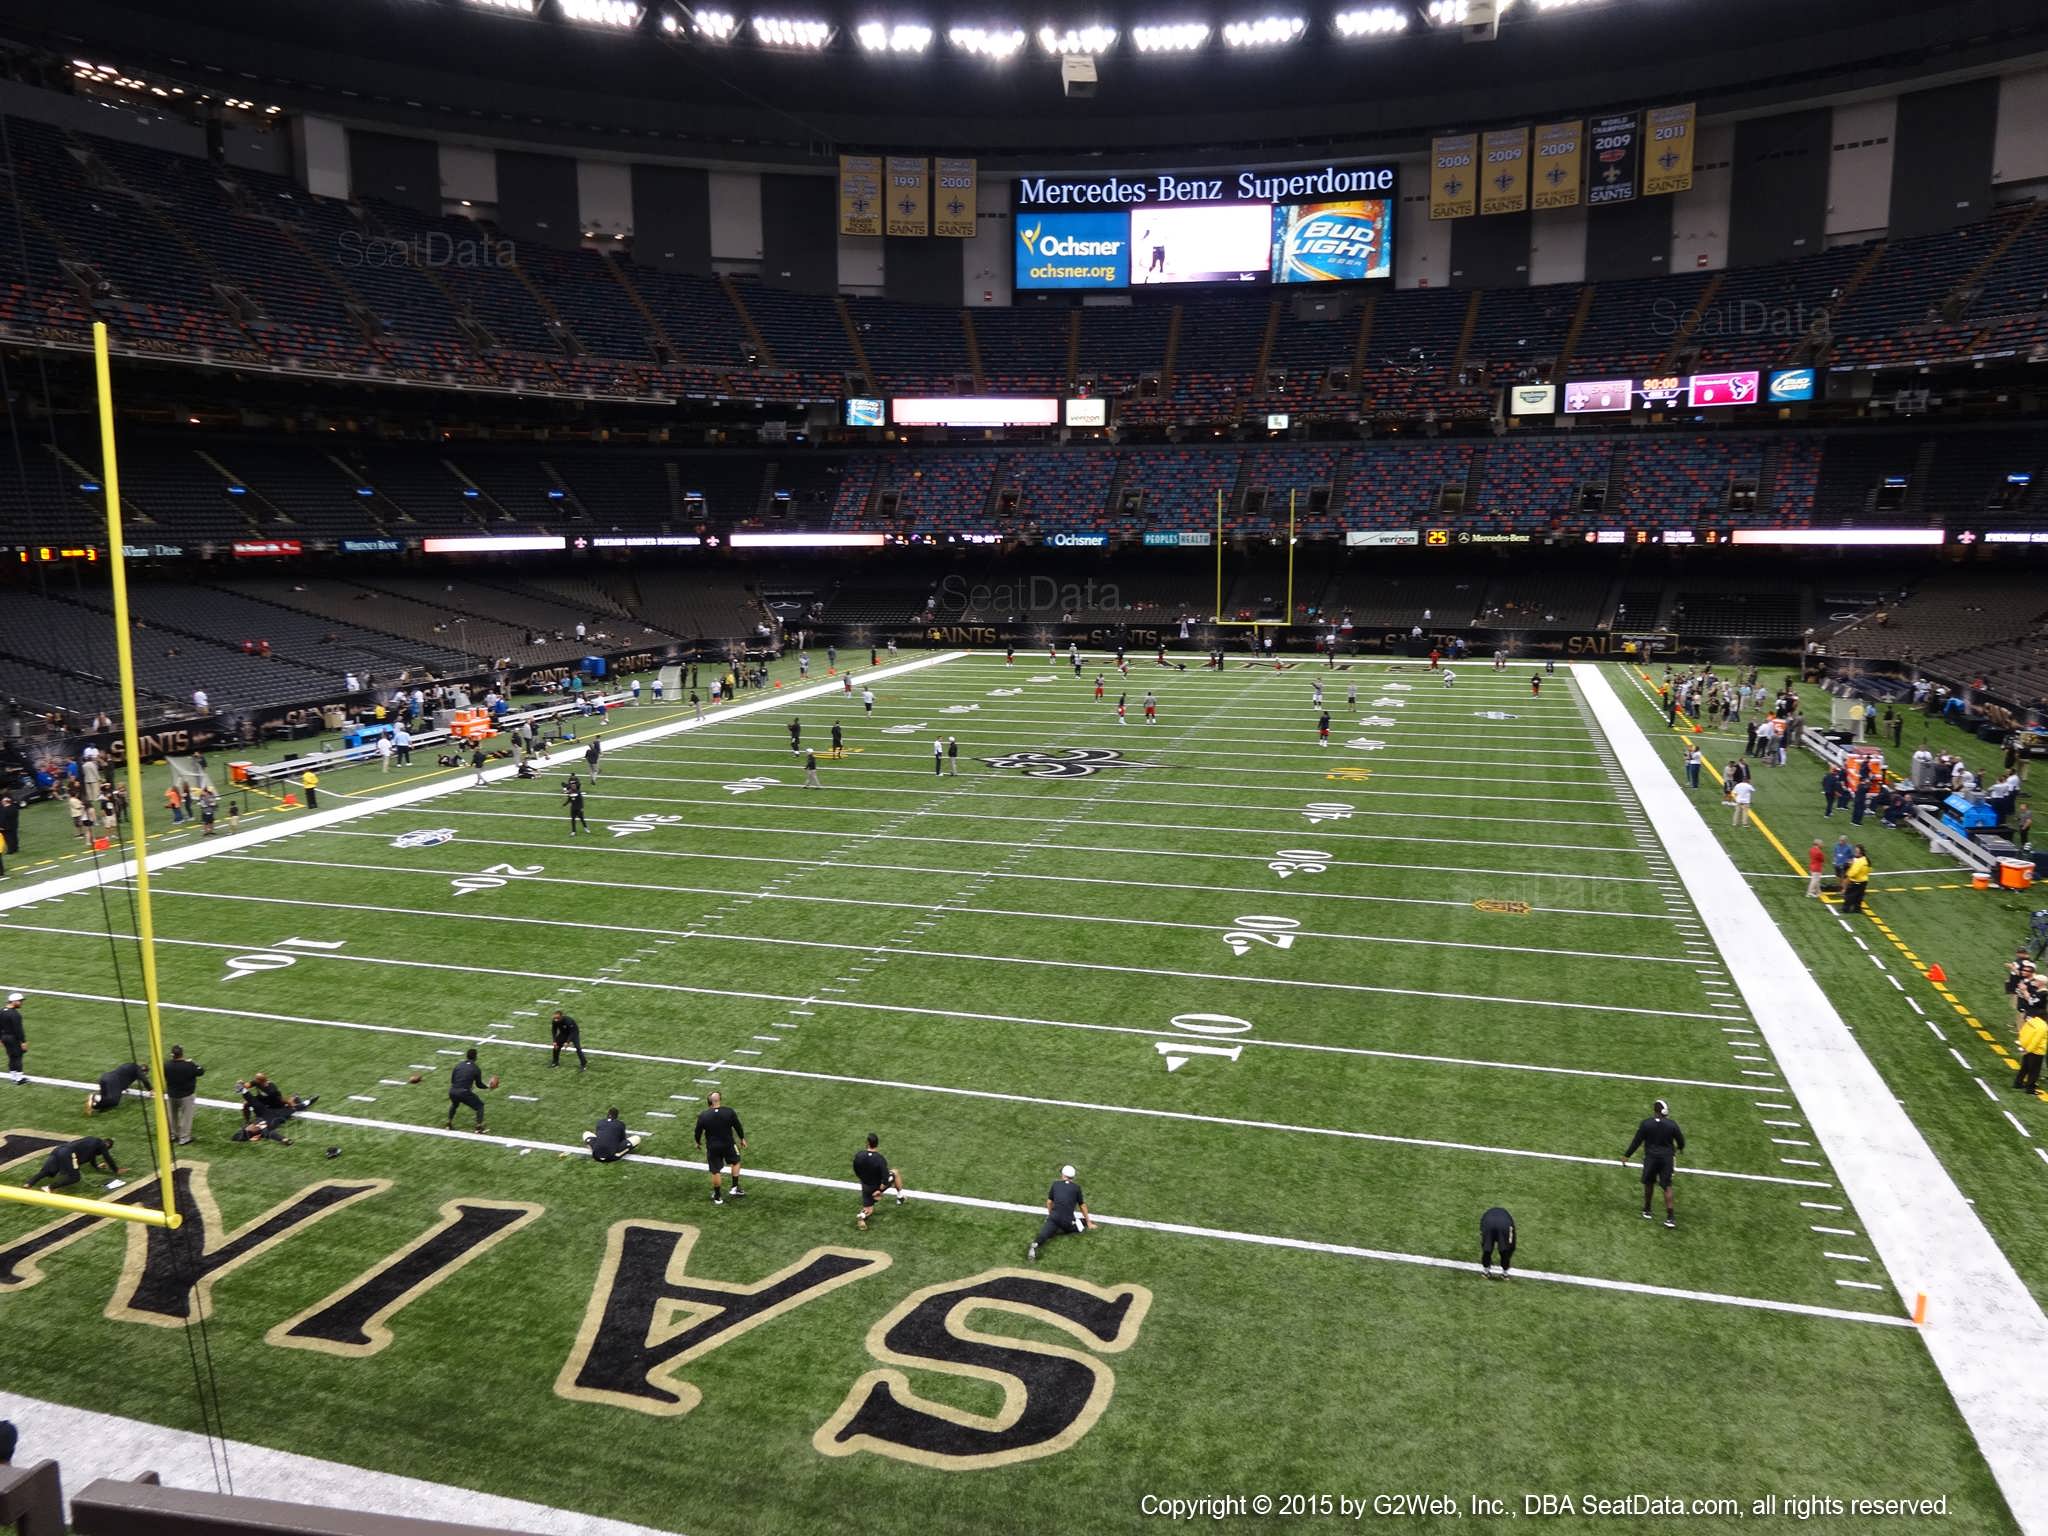 Seat view from section 239 at the Mercedes-Benz Superdome, home of the New Orleans Saints